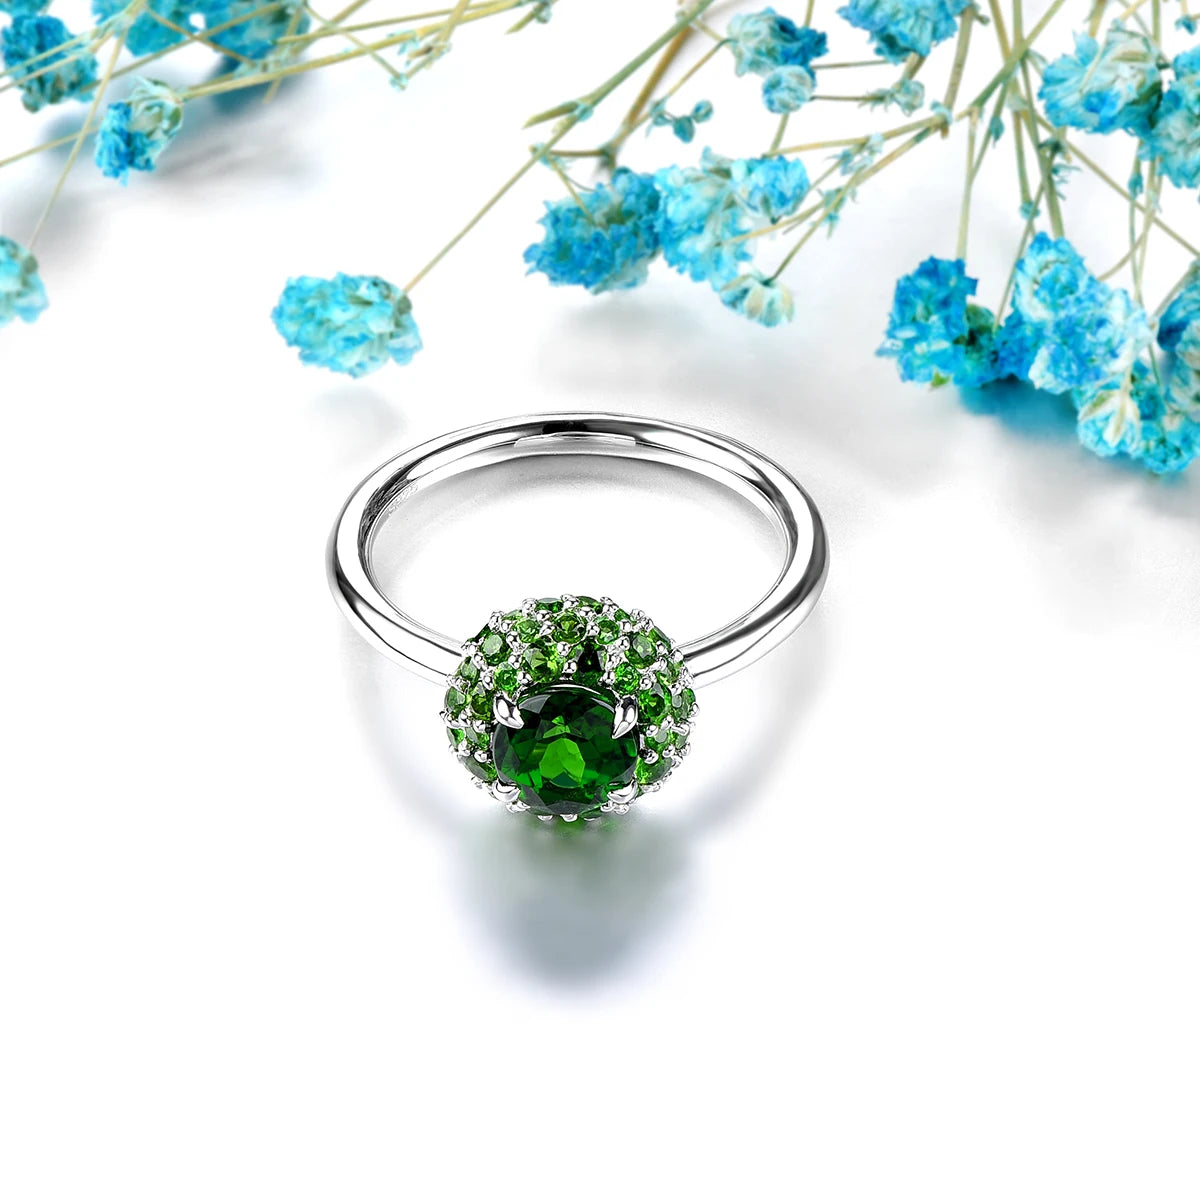 Natural Chrome Diopside Solid Sterling Silver Rings 1.7 Carats Women Elegant Style Unique Original Design S925 Jewelry Gifts